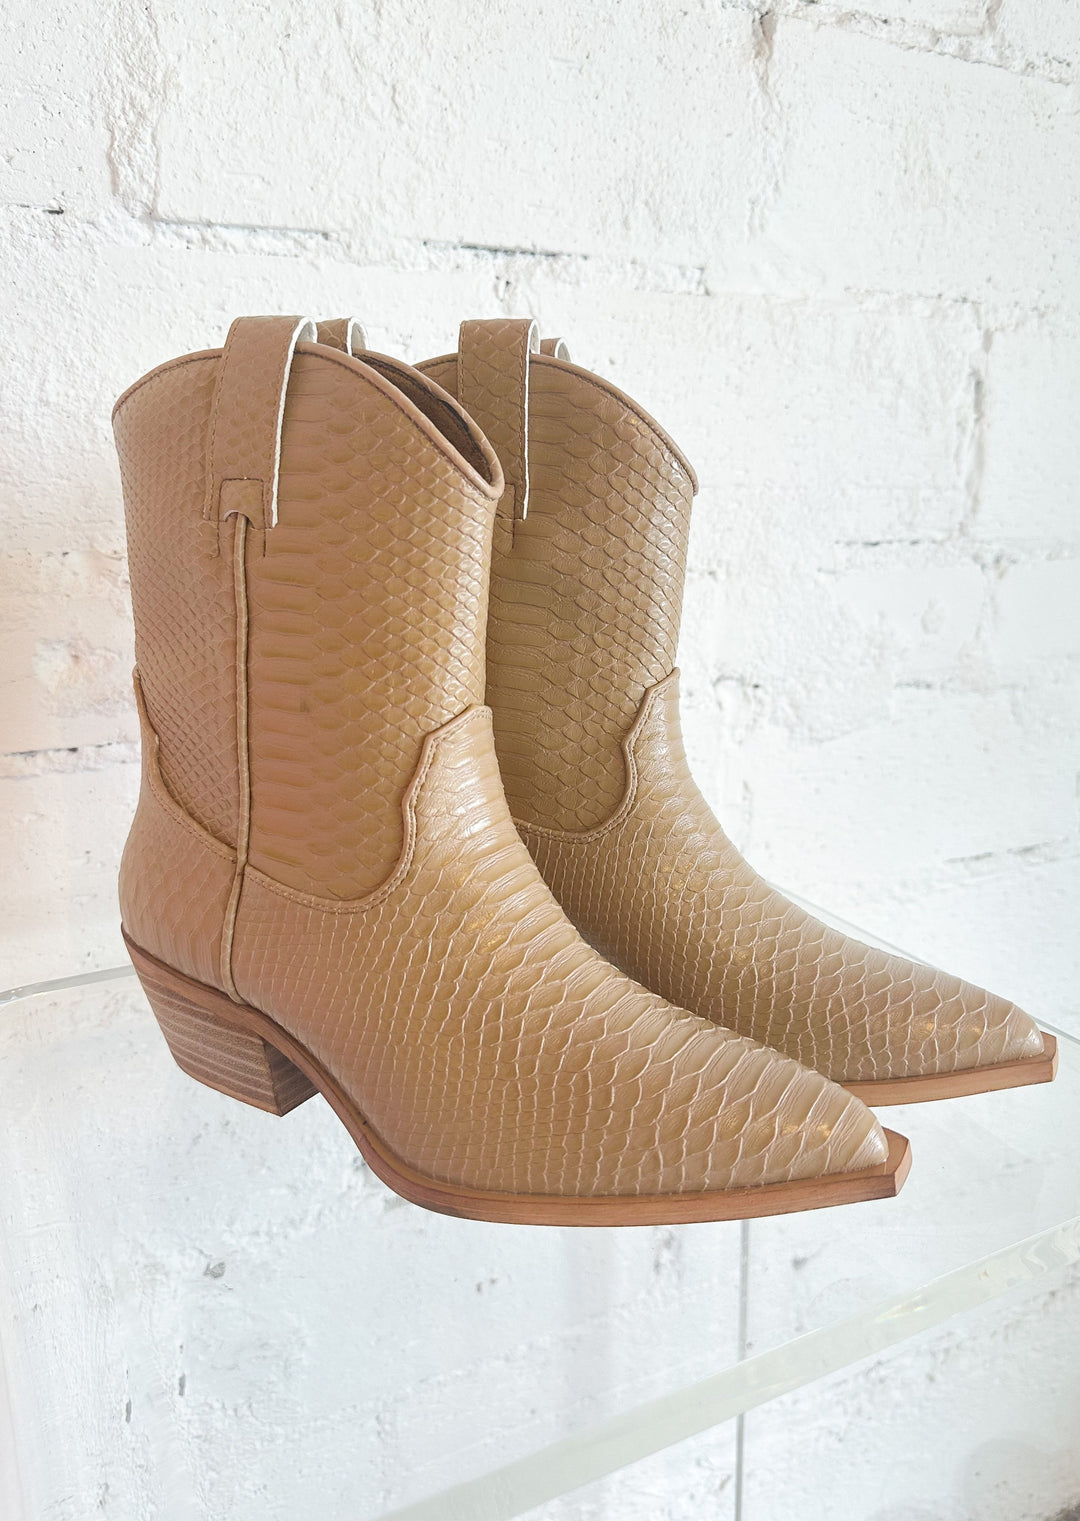 Mariam Boot, Shoes, Adeline, Adeline, dallas boutique, dallas texas, texas boutique, women's boutique dallas, adeline boutique, dallas boutique, trendy boutique, affordable boutique